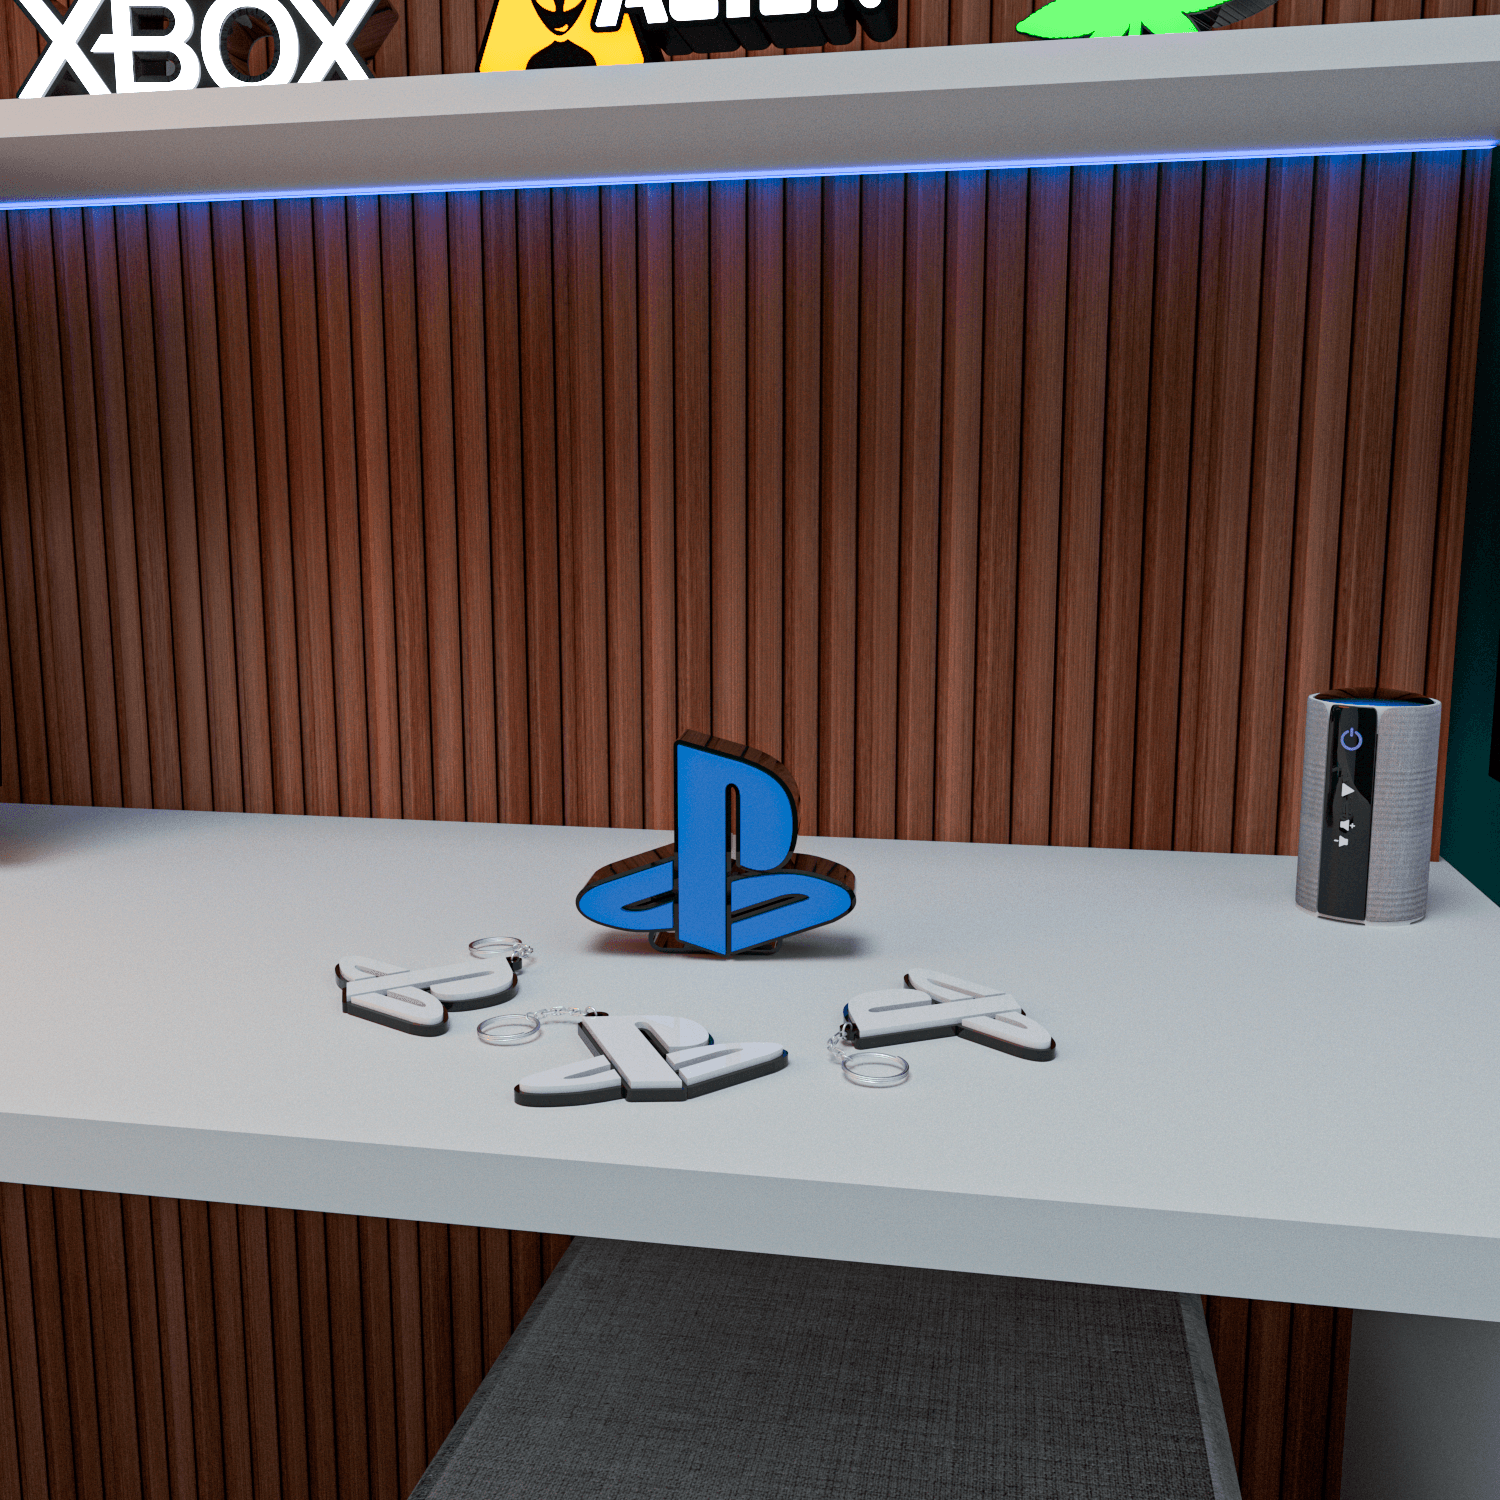 PLAYSTATION DECORATION AND KEYCHAIN 3d model